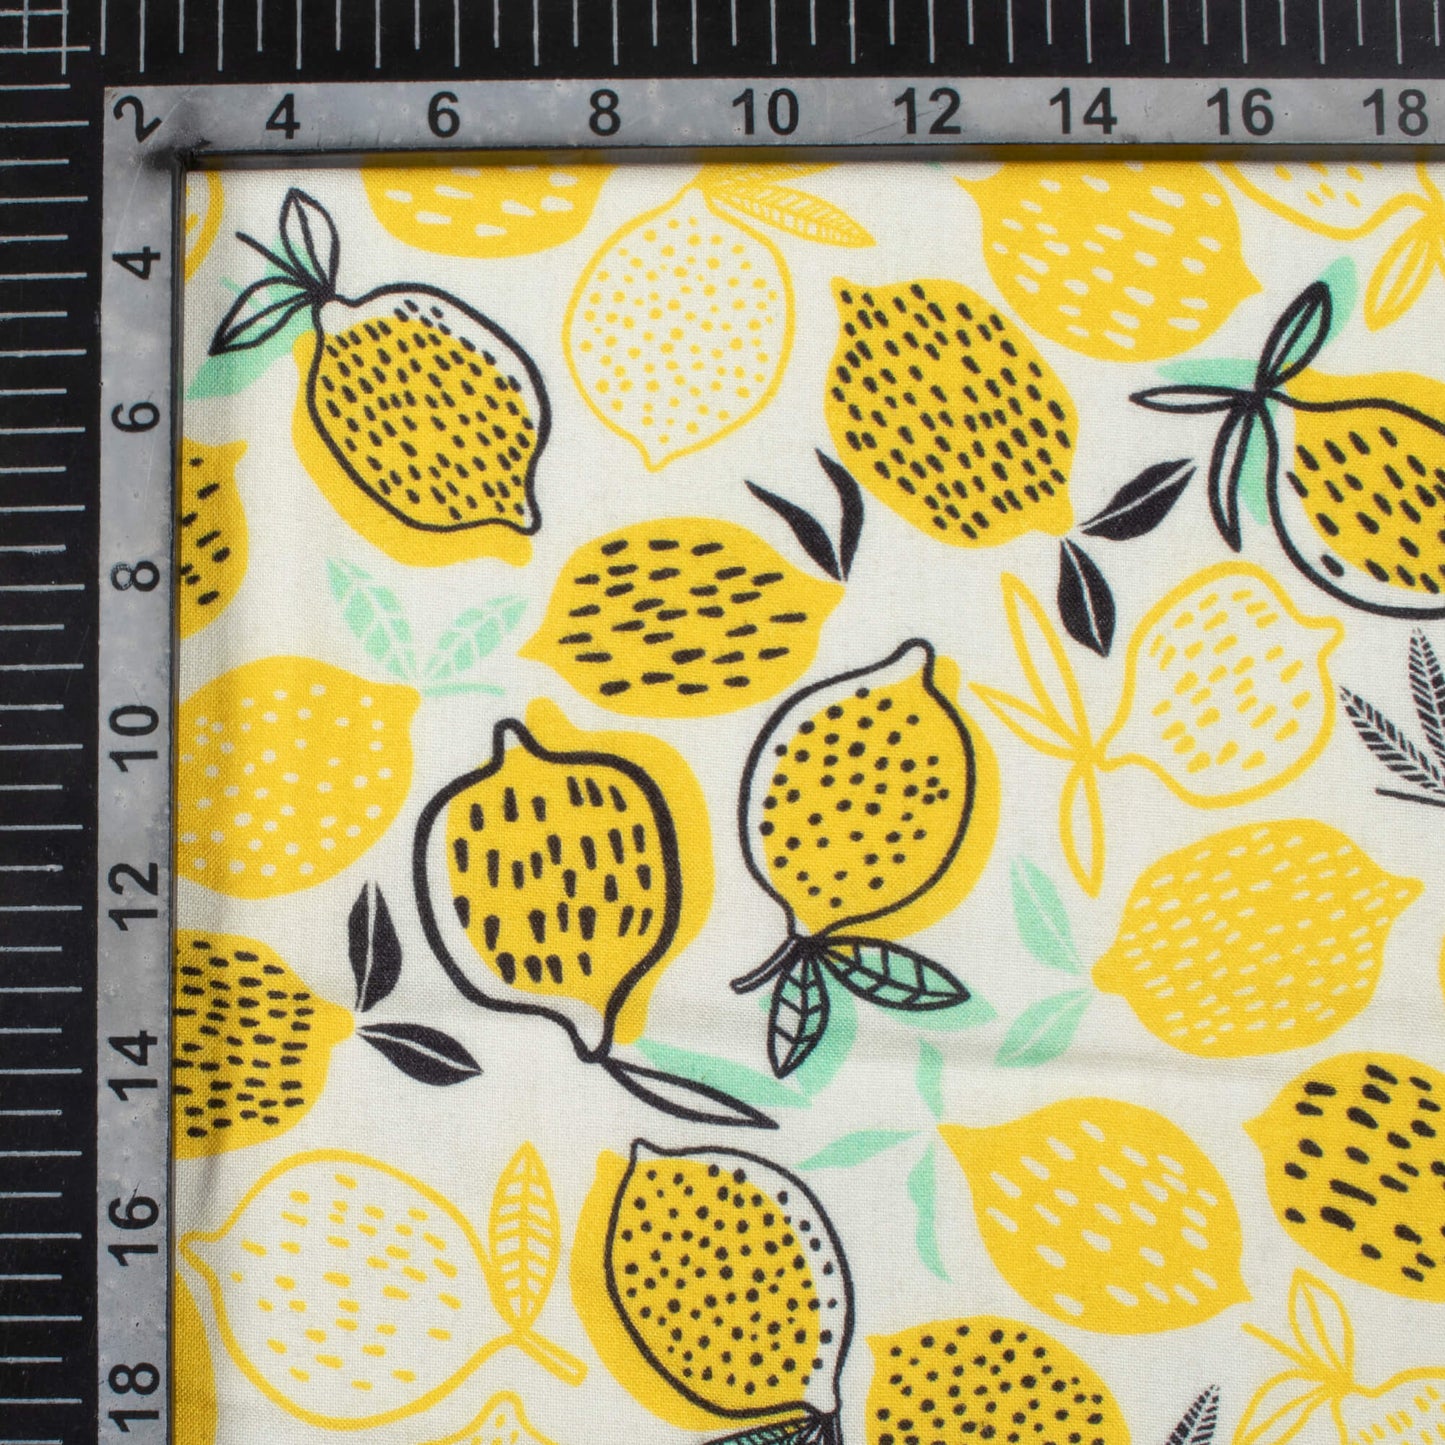 Lemon Yellow And Black Quirky Pattern Digital Print Viscose Rayon Fabric (Width 58 Inches)